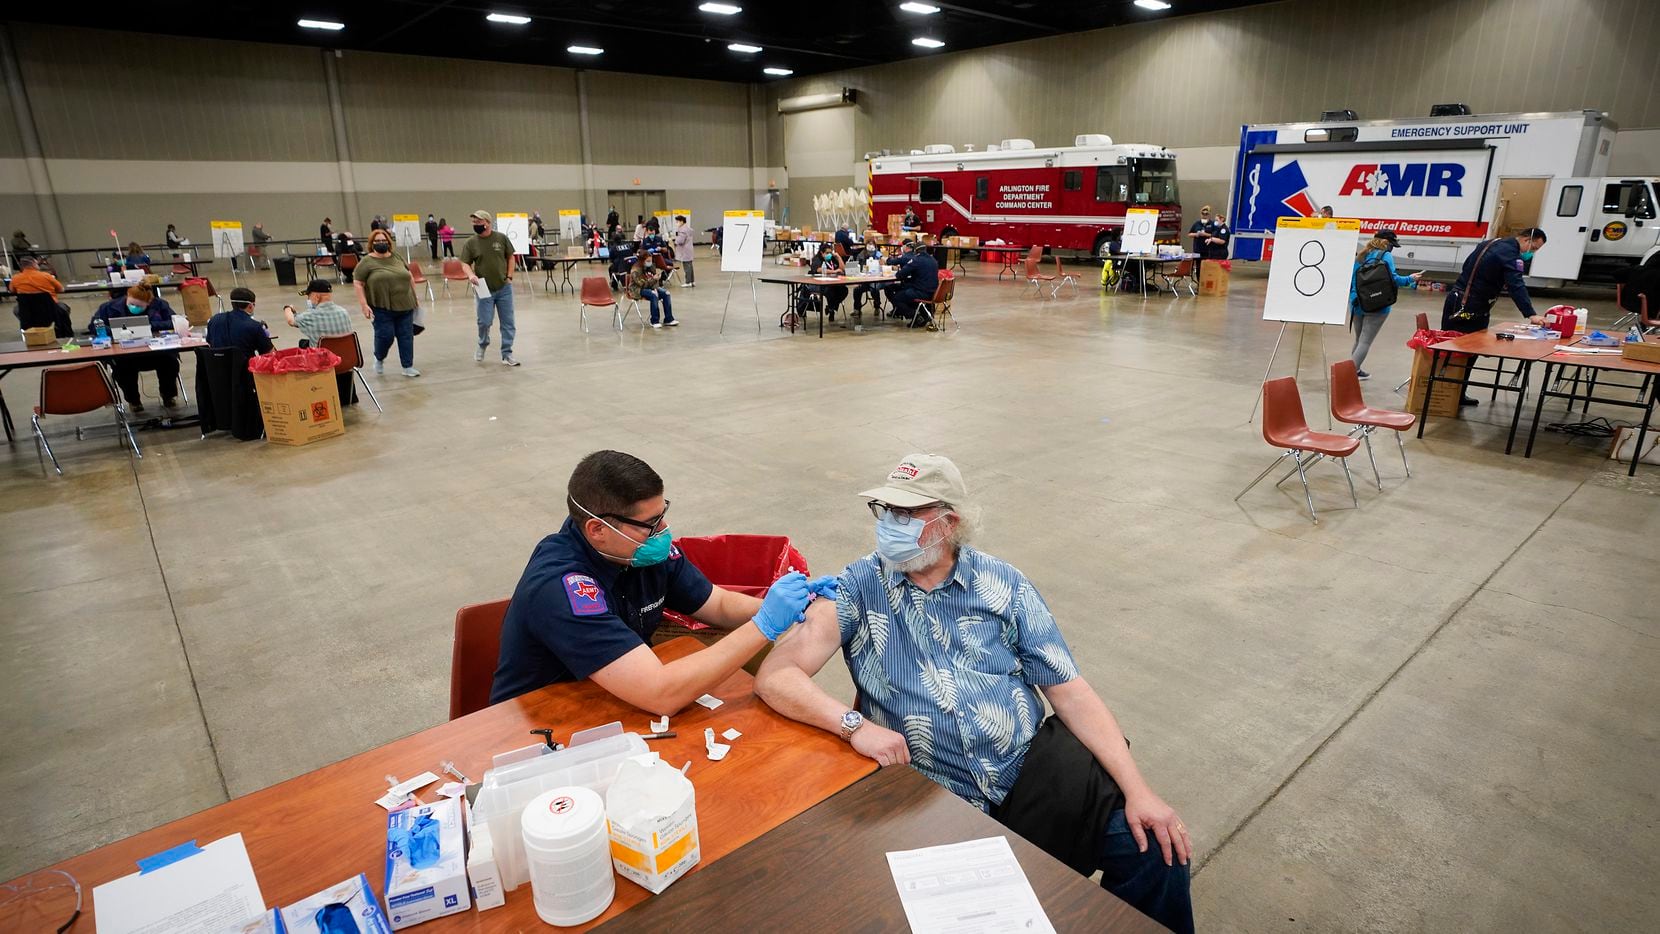 Joe McKay receives the Moderna COVID-19 vaccine from Arlington firefighter Derek O’Neill at the Esports Stadium Arlington & Expo Center on Tuesday, Jan. 5, 2021, in Arlington. The Tarrant County Public Health (TCHP) vaccination program is being implemented by the Arlington Fire Department as part of the city’s mass vaccination effort.